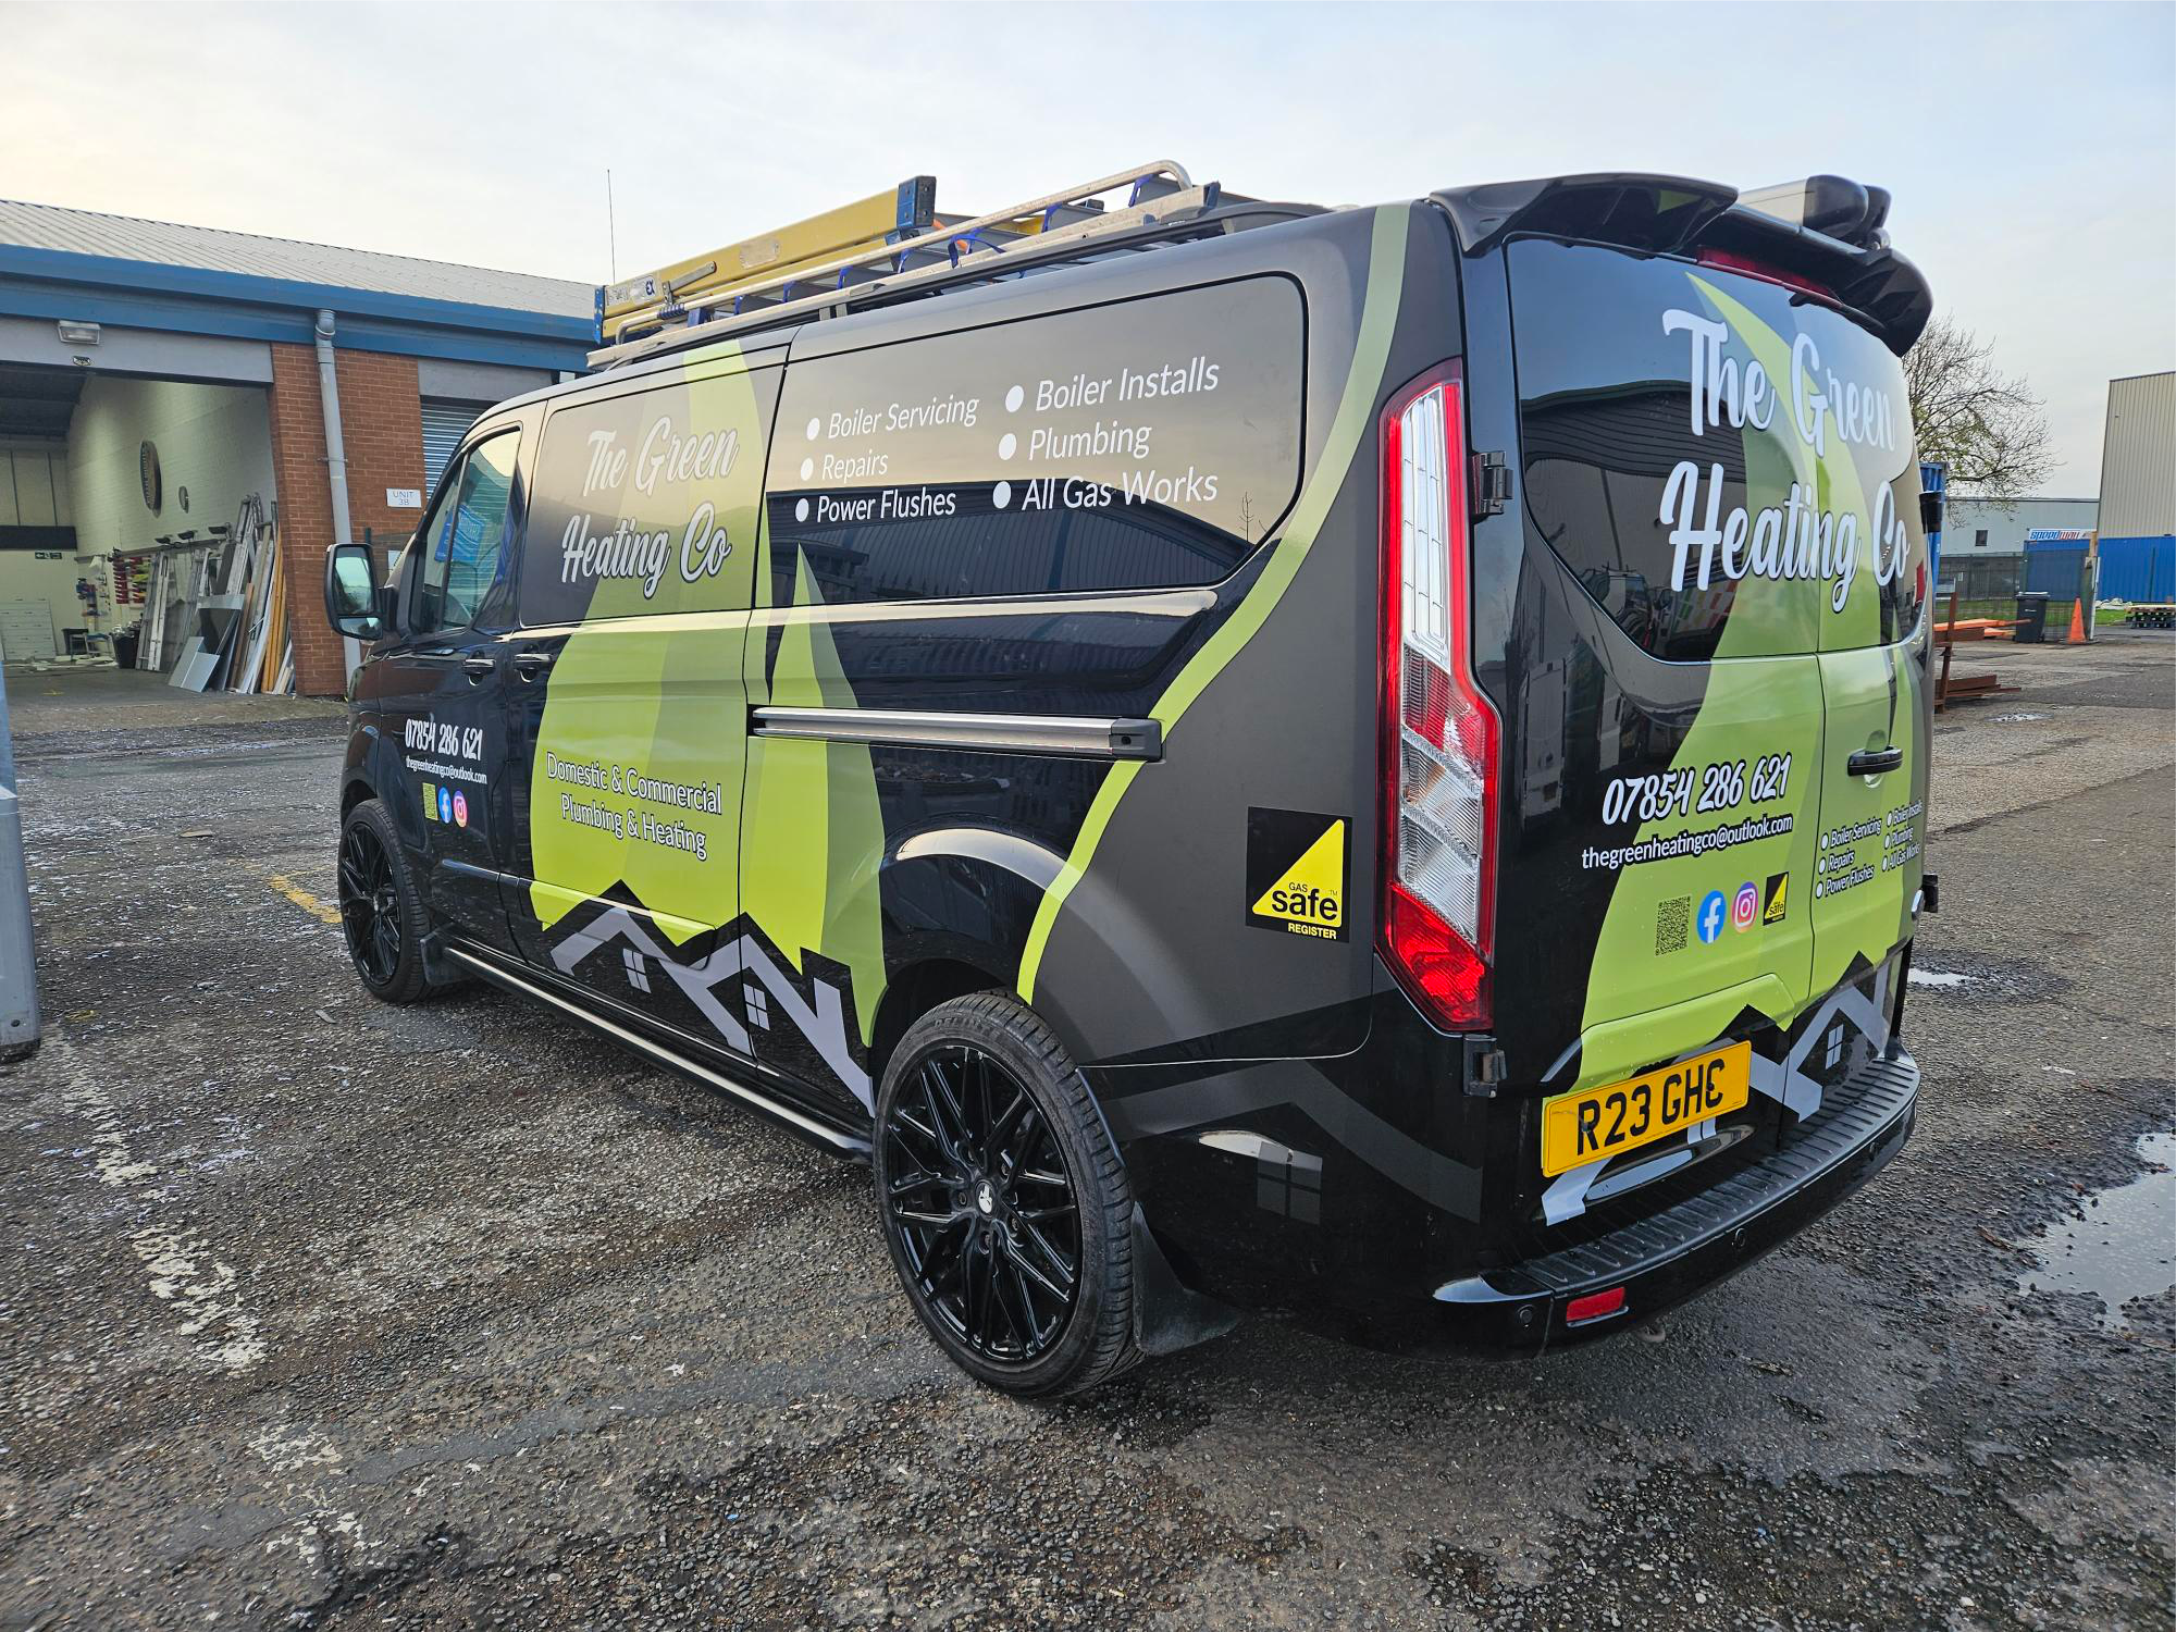 The Green Heating Co Print Cut Graphics by Business 101 in Hull